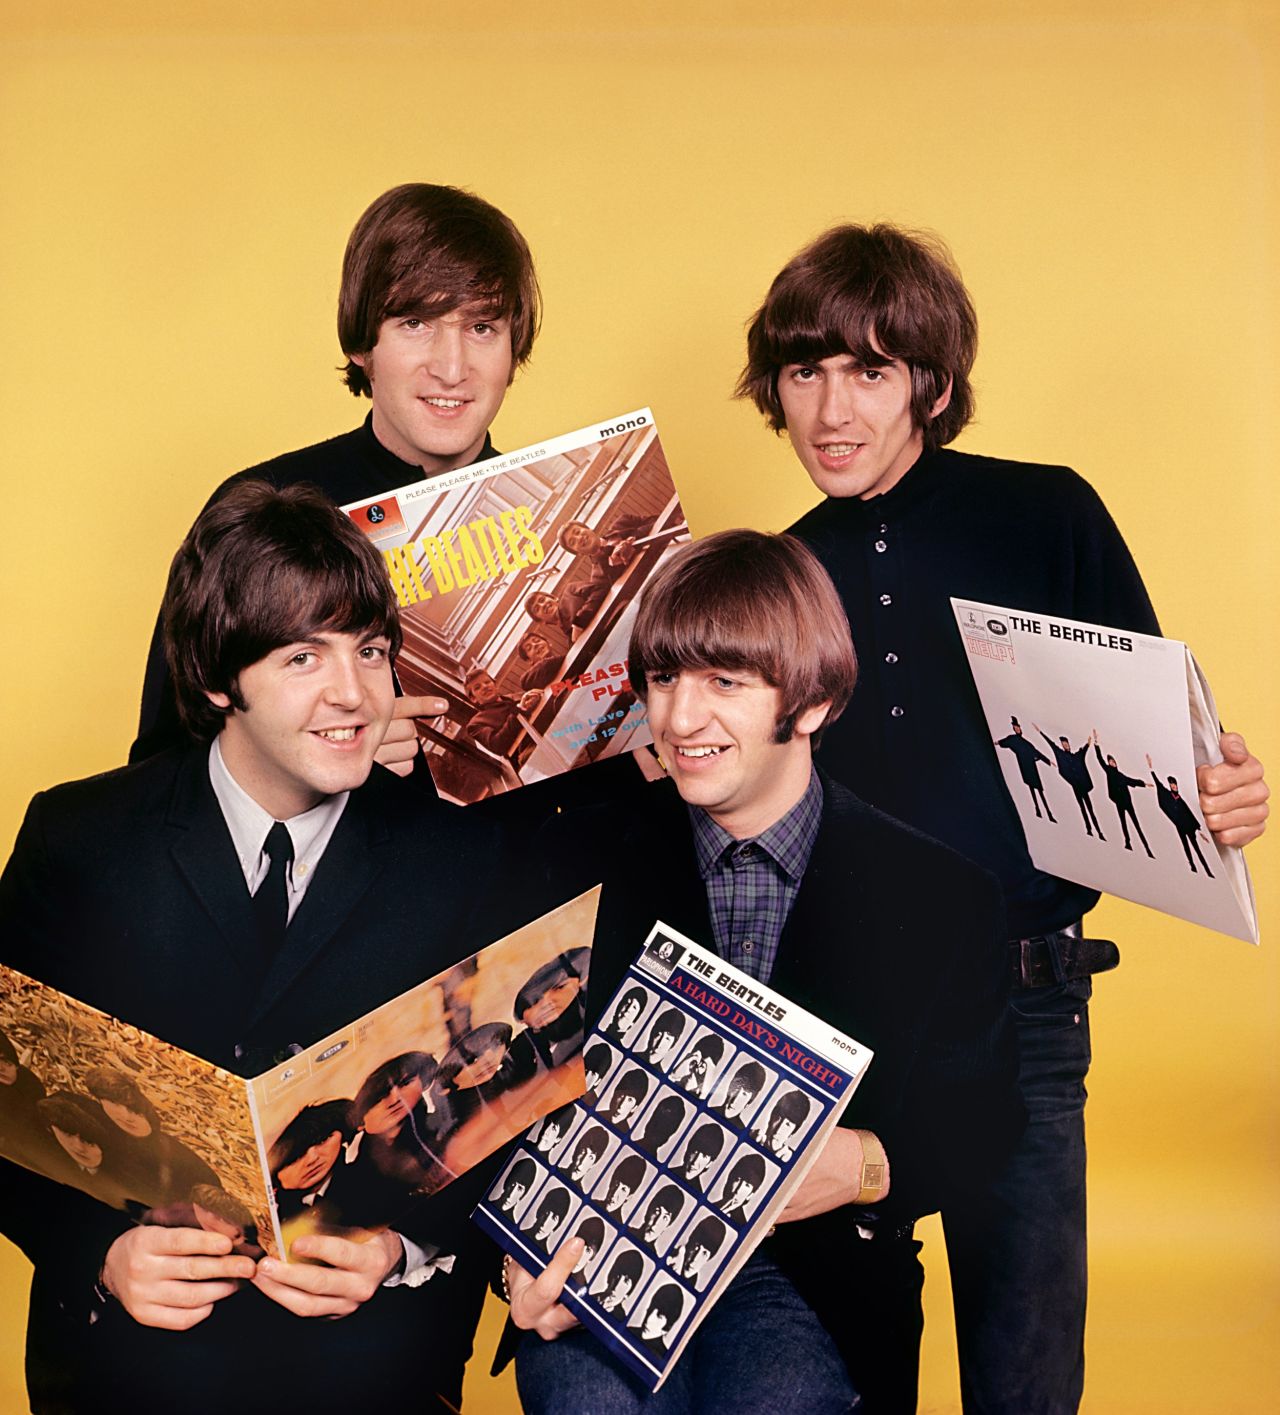 The Beatles arrived in the U.S. 50 years ago and embarked on a history-making path of pop culture dominance.<a href="http://www.cnn.com/SPECIALS/us/the-sixties"> "The Sixties: The British Invasion"</a> looks at John, Paul, George and Ringo and how the Fab Four's influence persists. <br /><br />Over the years, the facts of the Beatles' story have sometimes been shoved out of the way by half-truths, misconceptions and outright fiction. Here are a few details you might have heard, with the true story provided by <a href="http://www.amazon.com/Tune-In-Beatles-These-Years/dp/1400083052" target="_blank" target="_blank">Mark Lewisohn's "Tune In" </a>and others. 